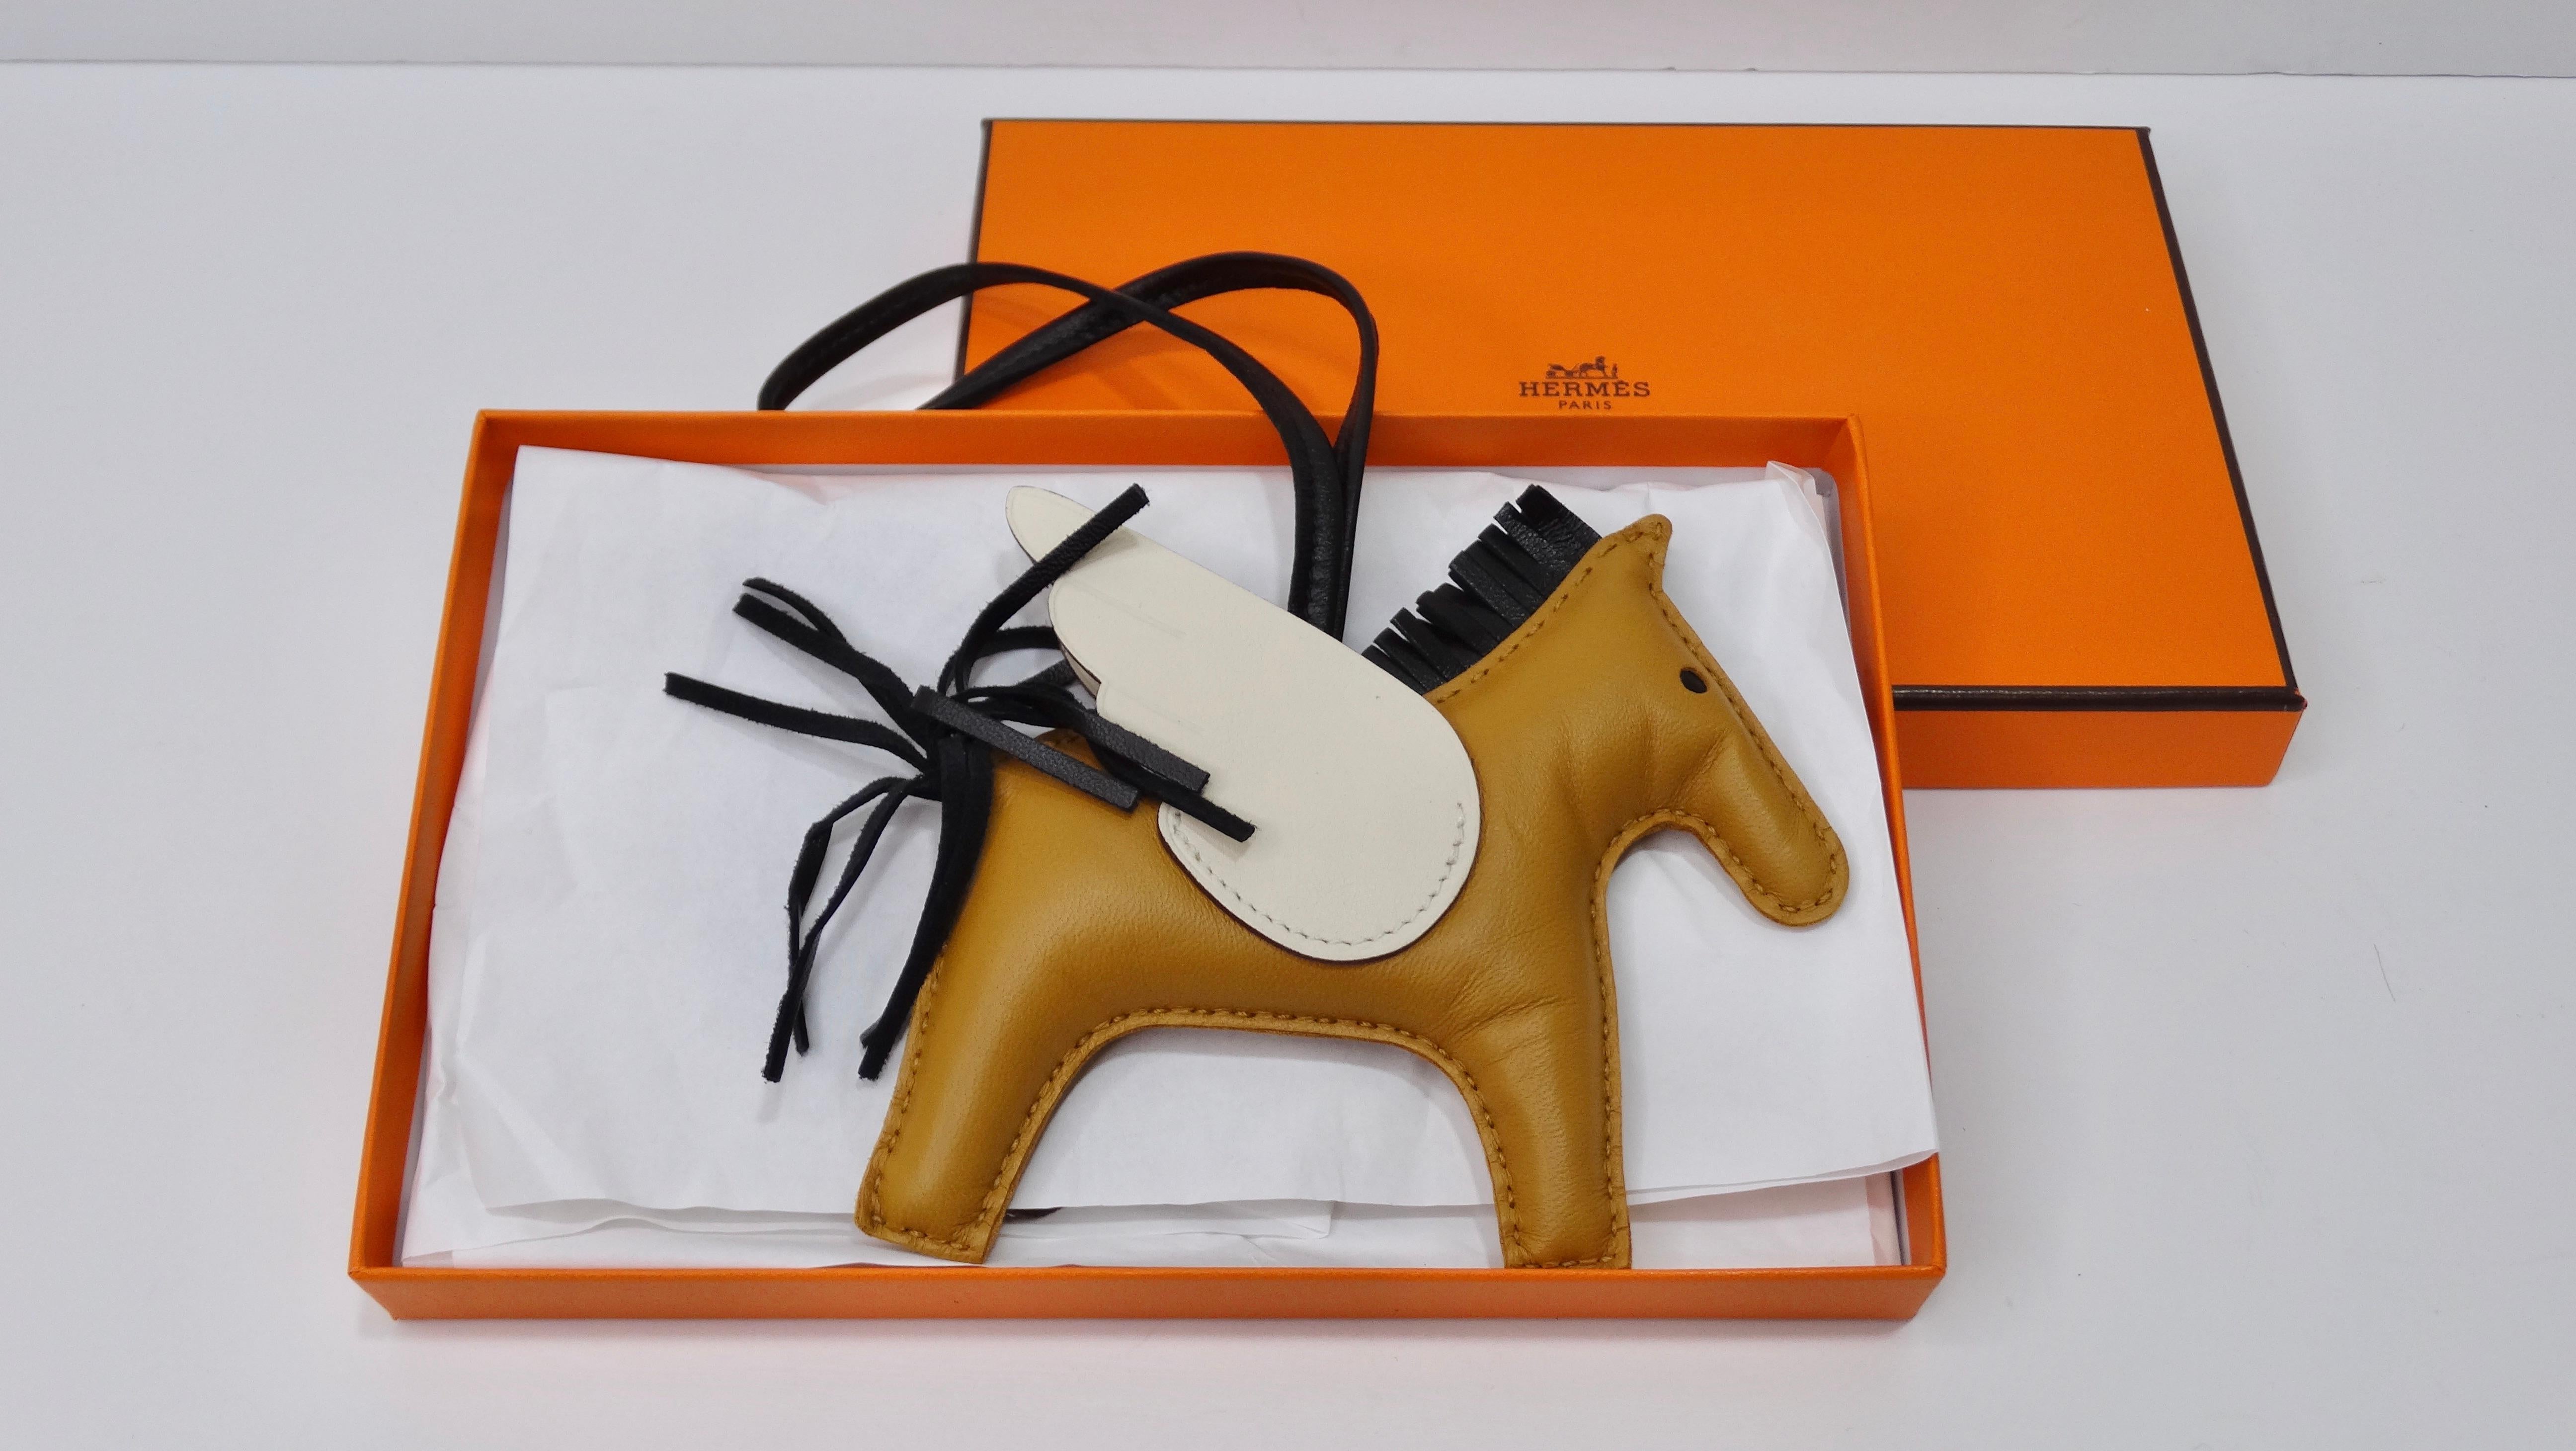 Bring a little flair to your everyday handbag! The key to making fashion effortless is having fun and putting your own unique twist on your ensembles. This is a tiny horse figure that will be sure to add a bright touch to your favorite accessory.